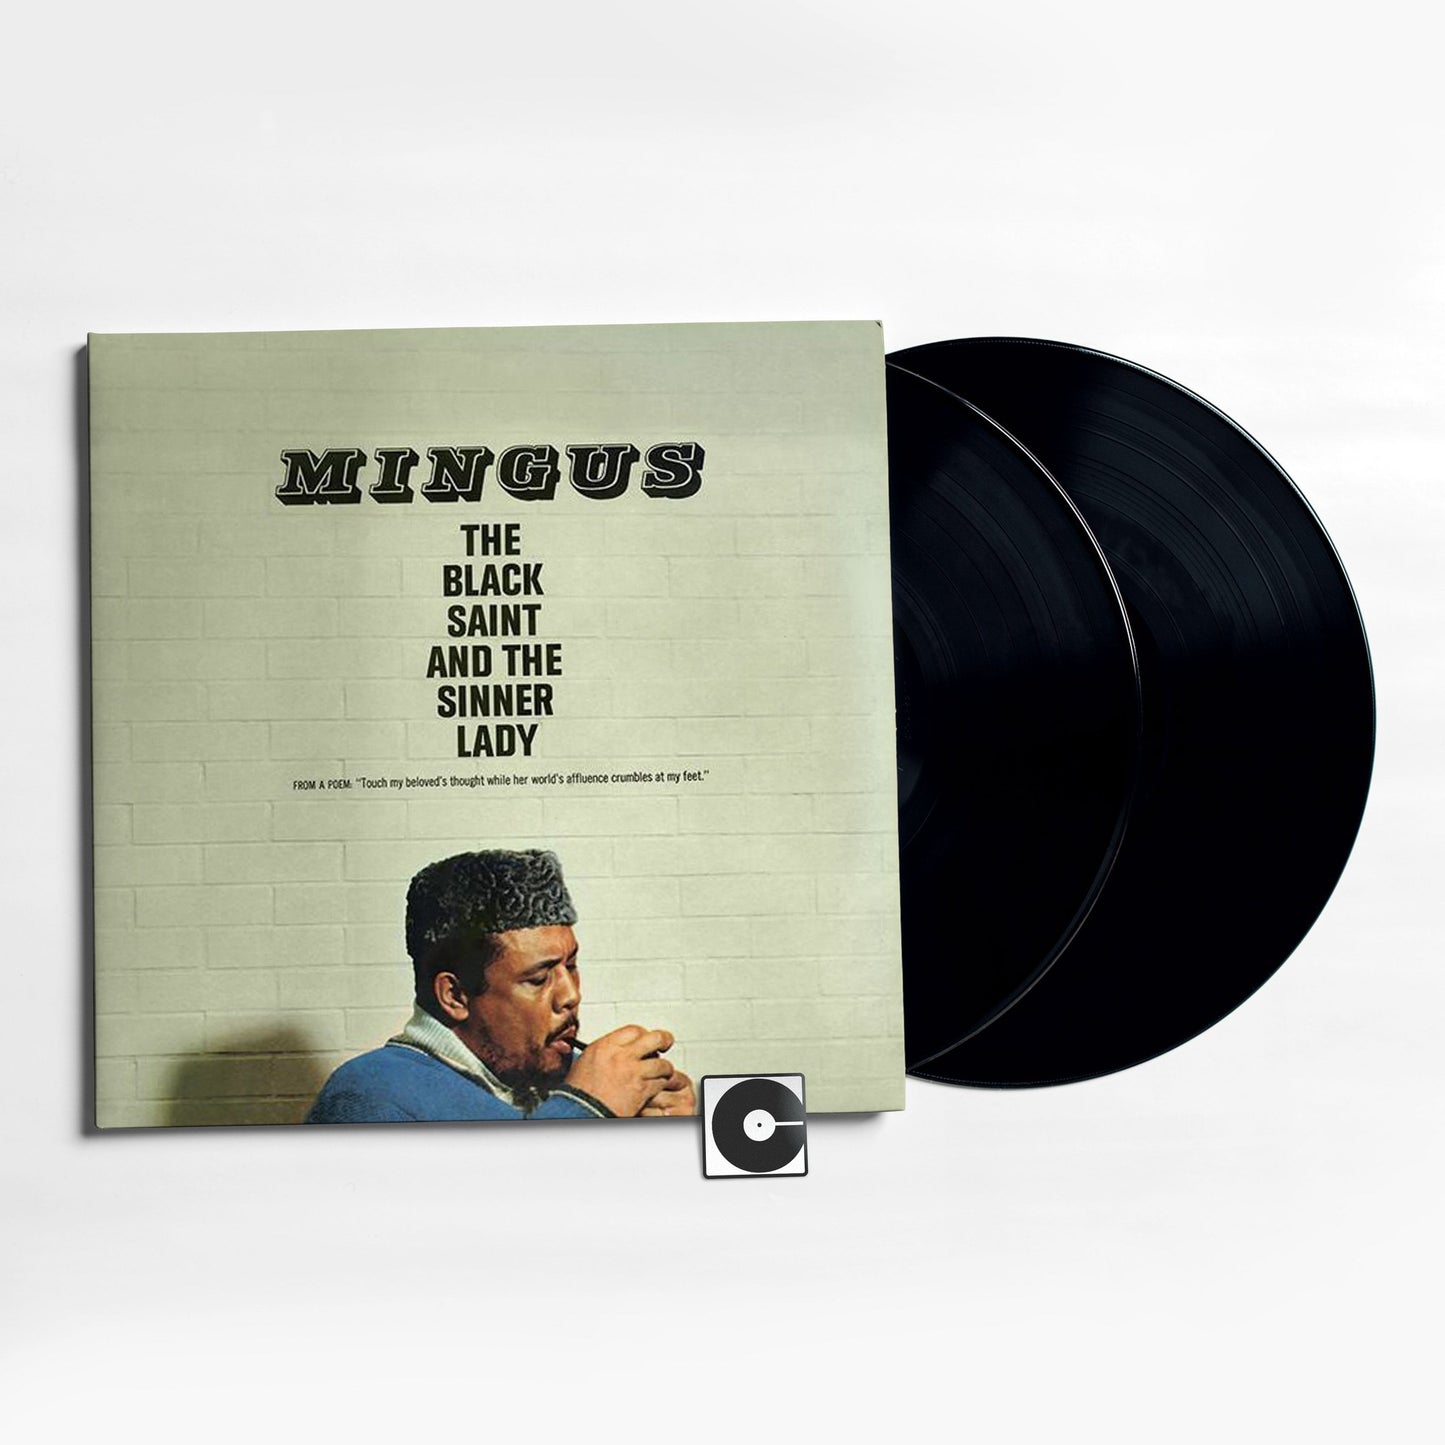 Charles Mingus - "The Black Saint And The Sinner Lady" Analogue Productions